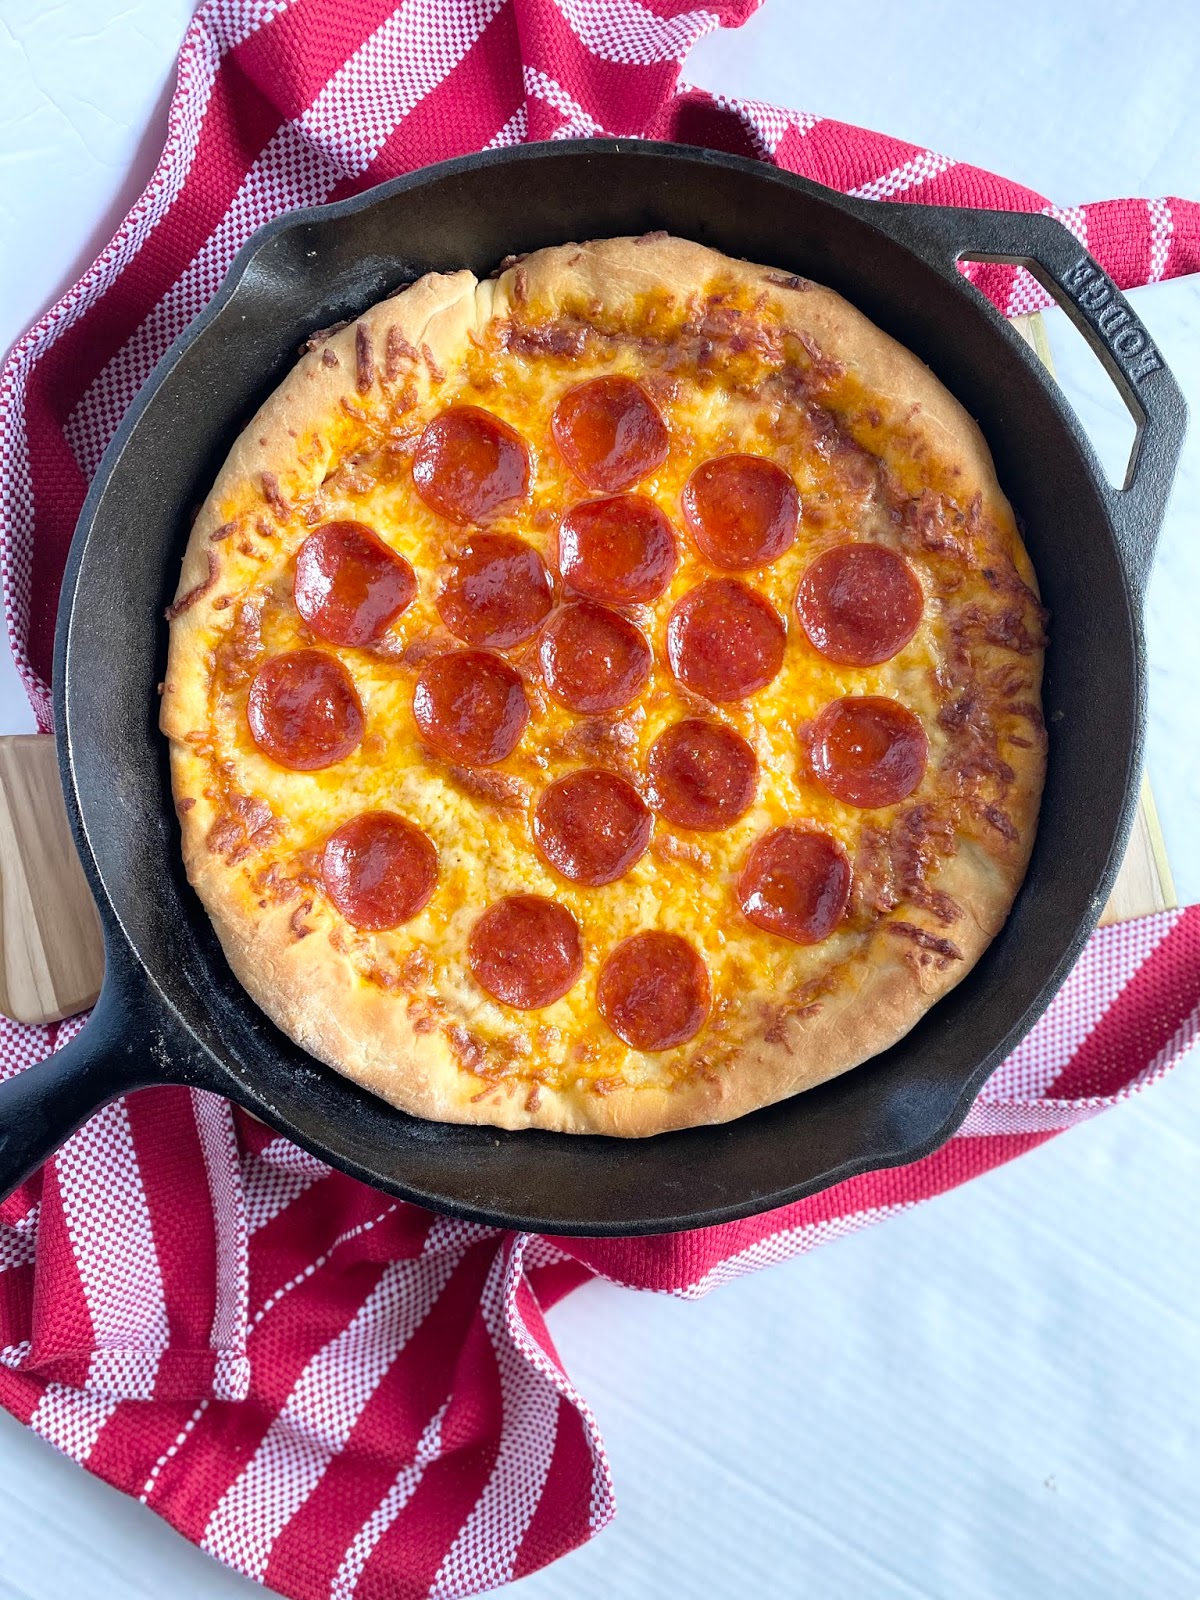 How To Make Cast Iron Skillet (Pan) Pizza - Thursday Night Pizza